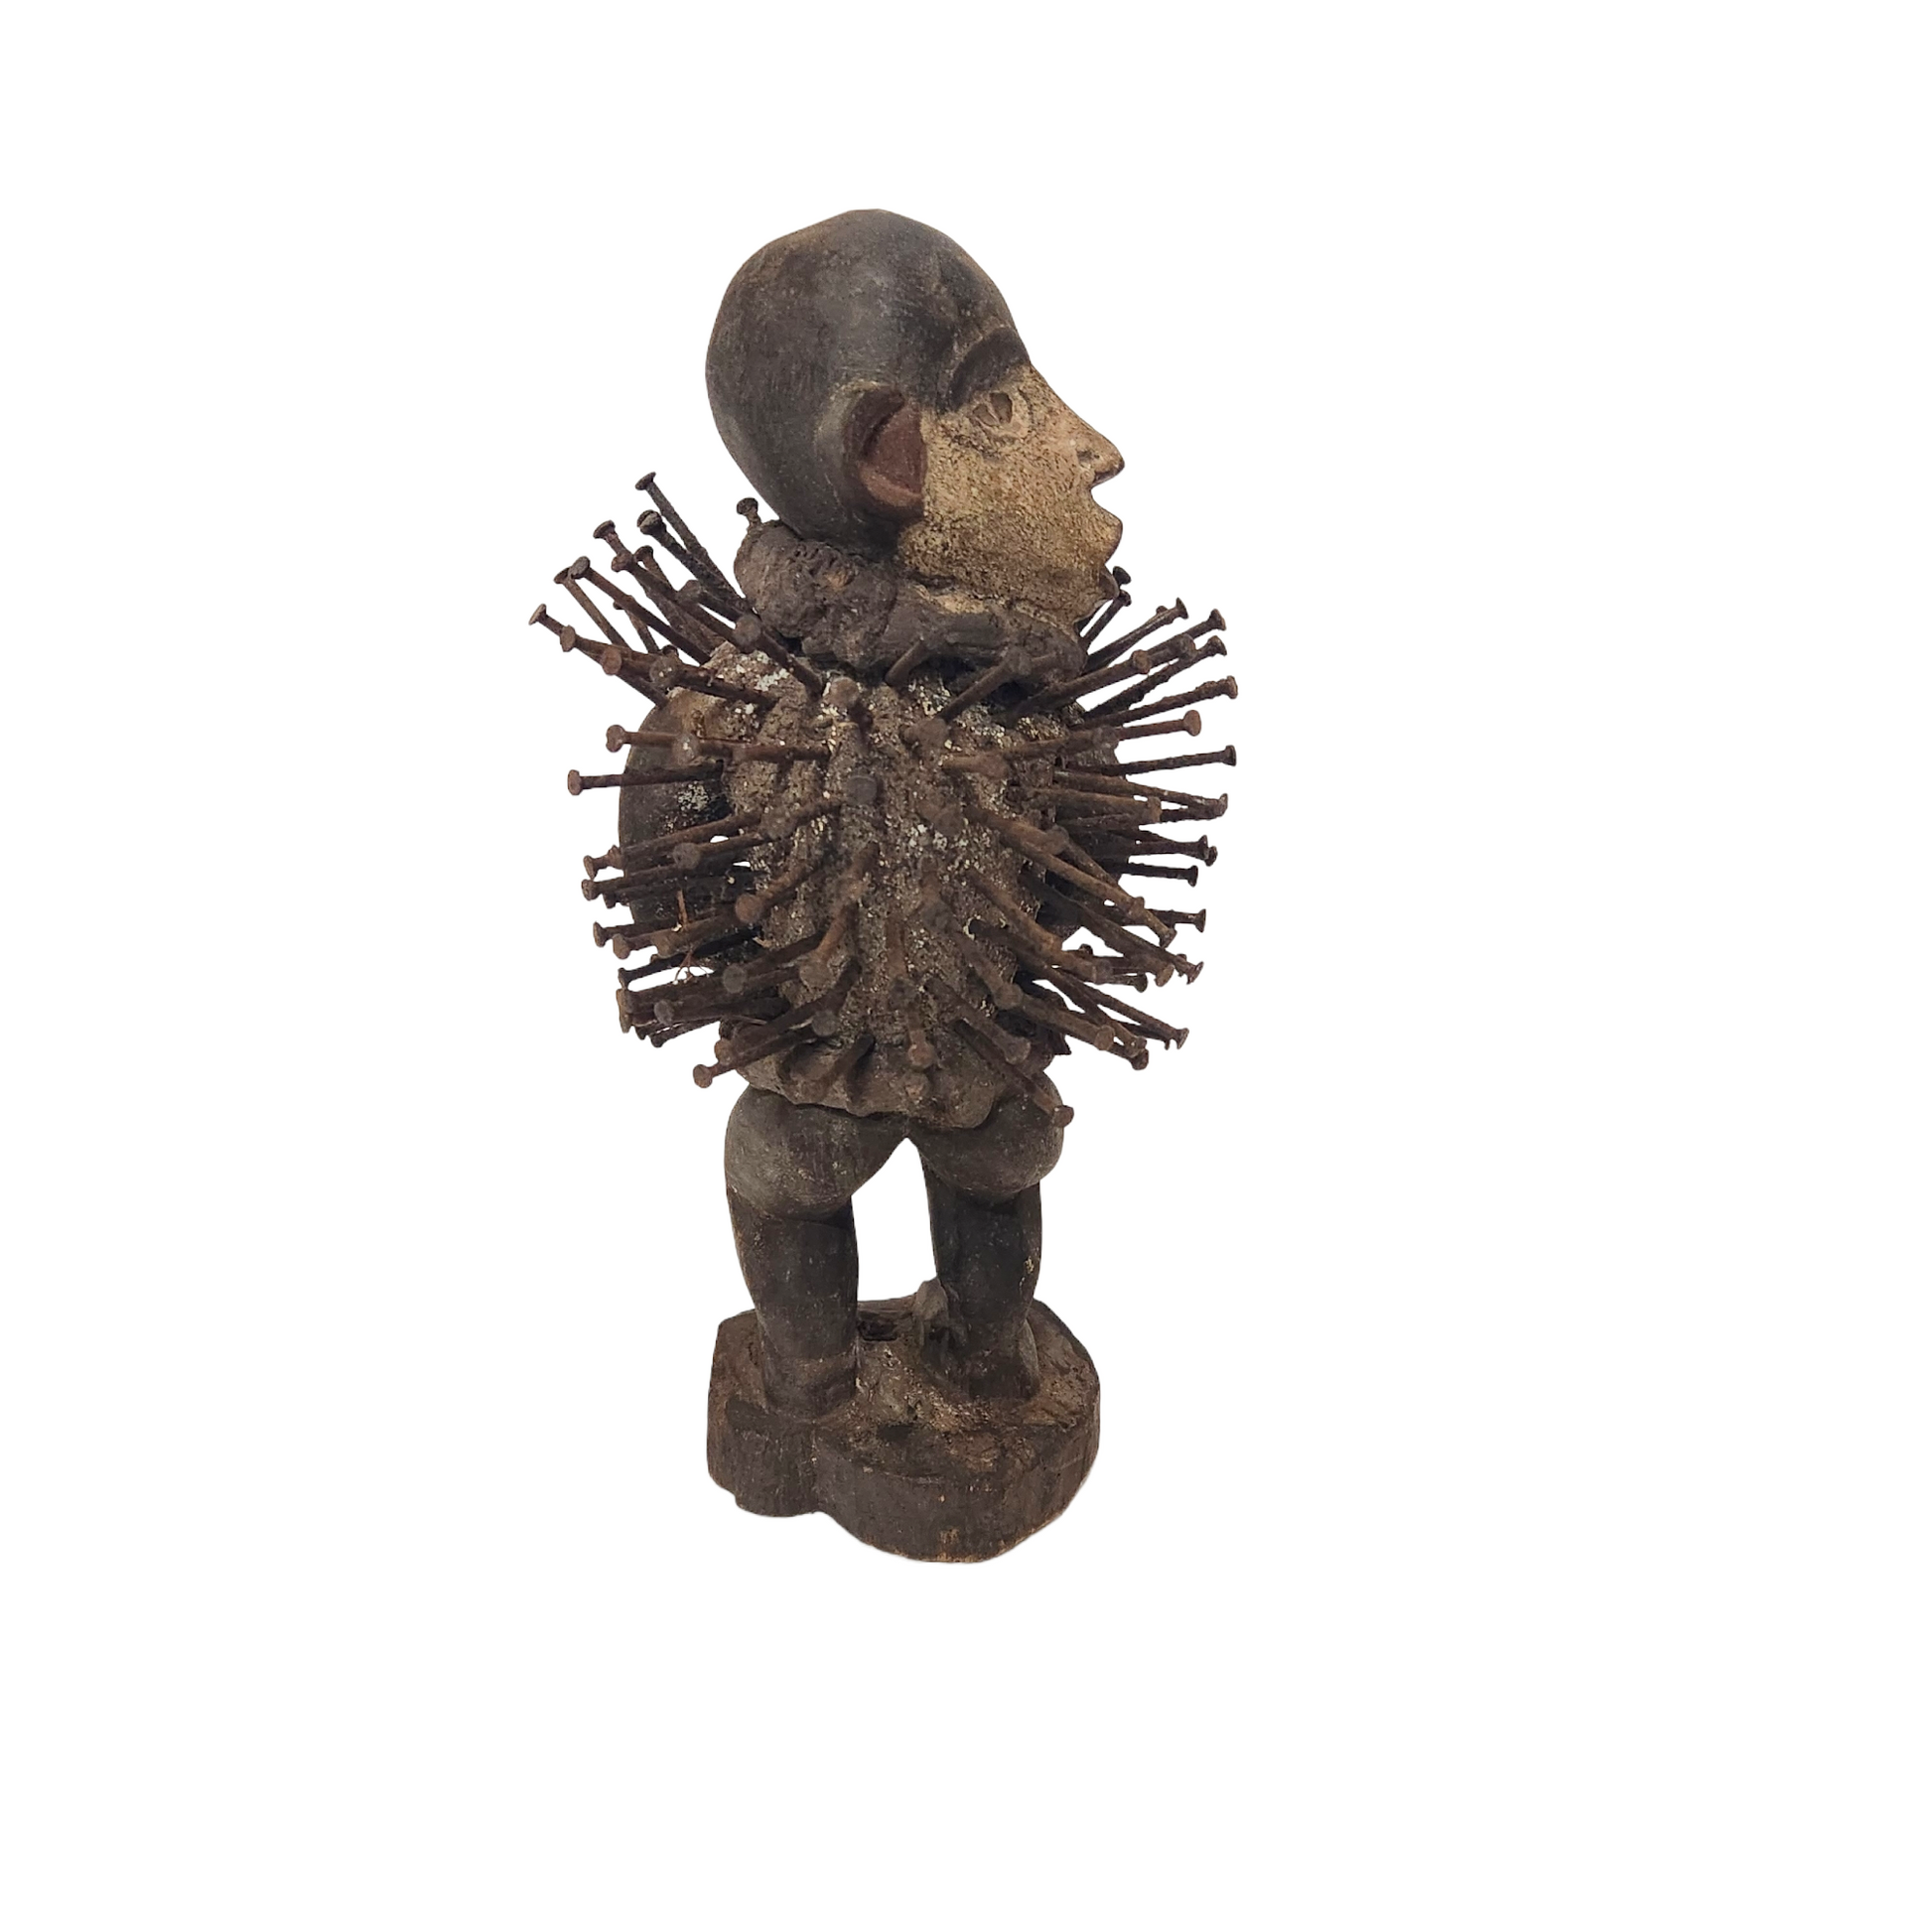 Bacongo Nails fetish from Zaire ( 20th Century) - MD African Art